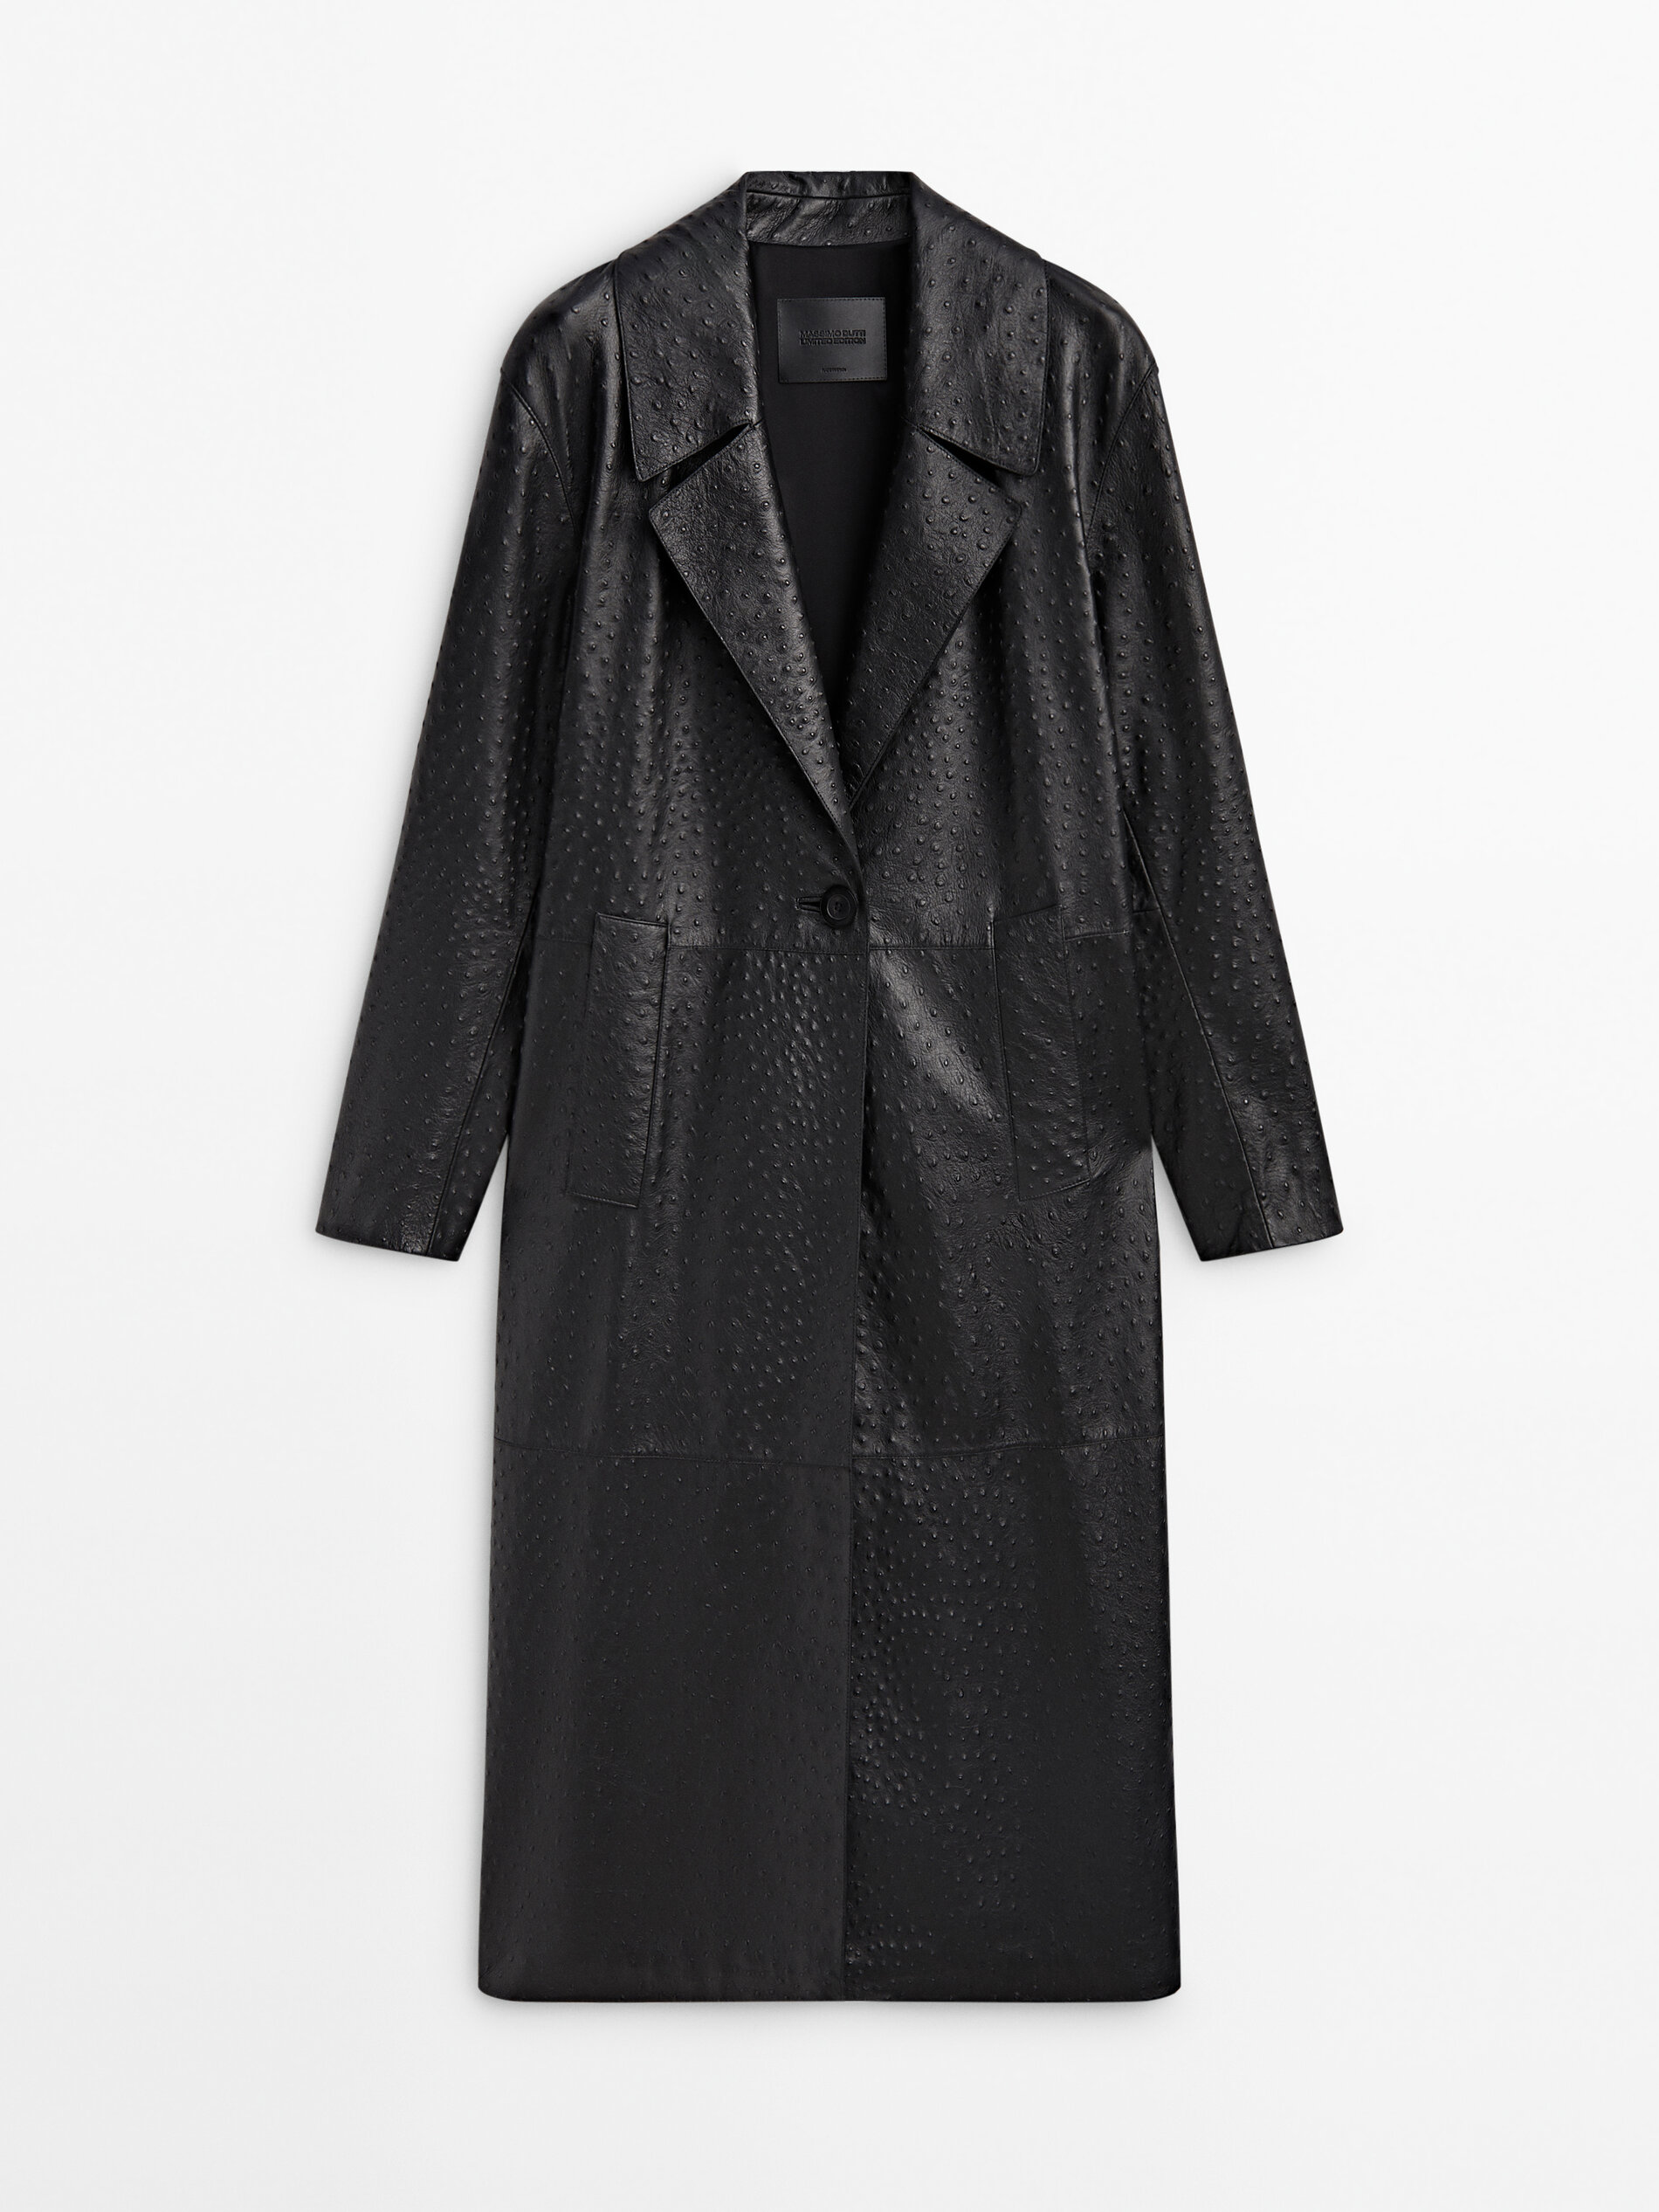 EMBOSSED NAPPA LEATHER COAT - LIMITED EDITION